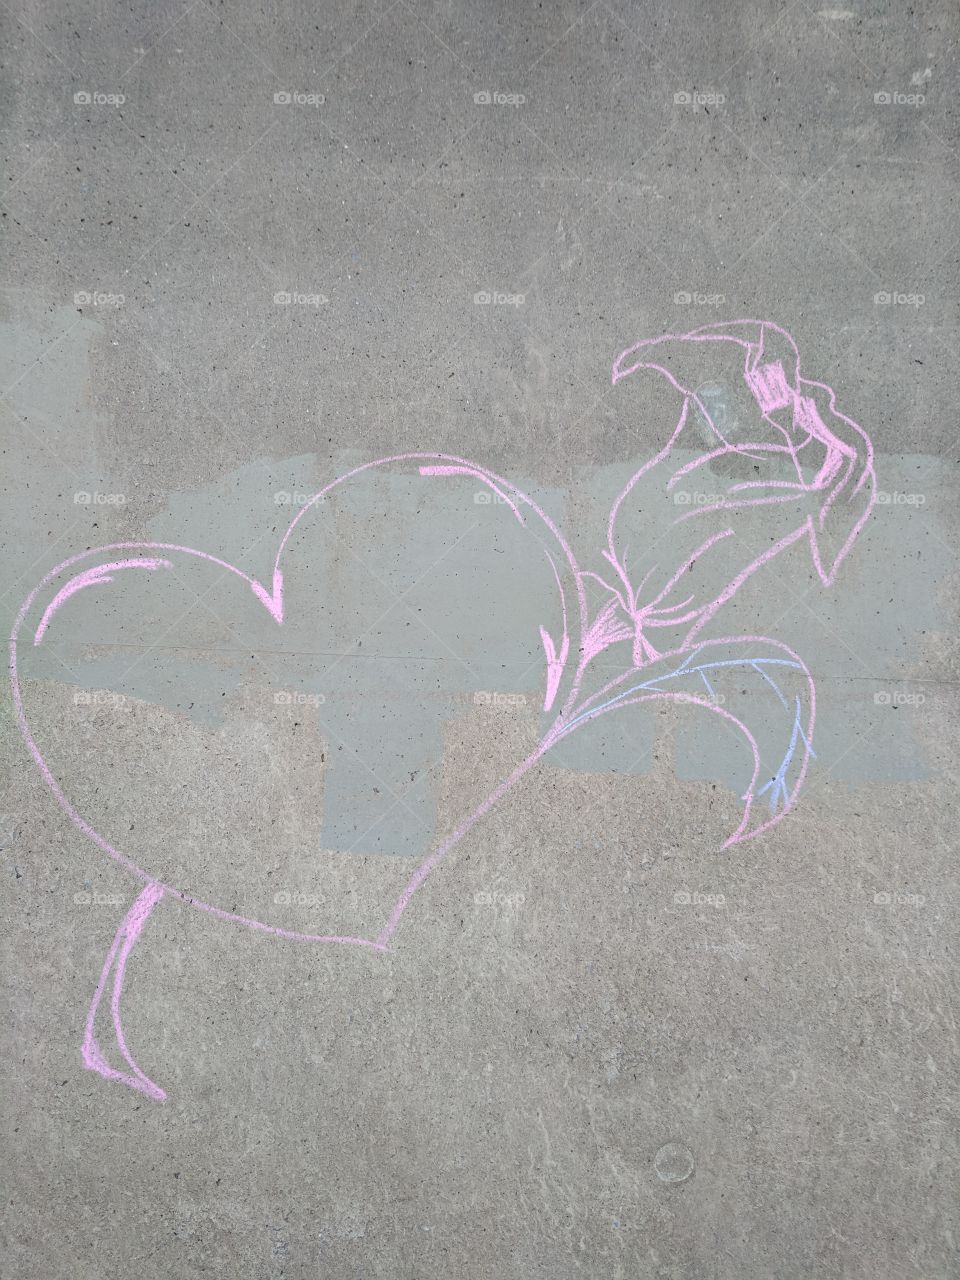 Chalk drawing on Floodwall